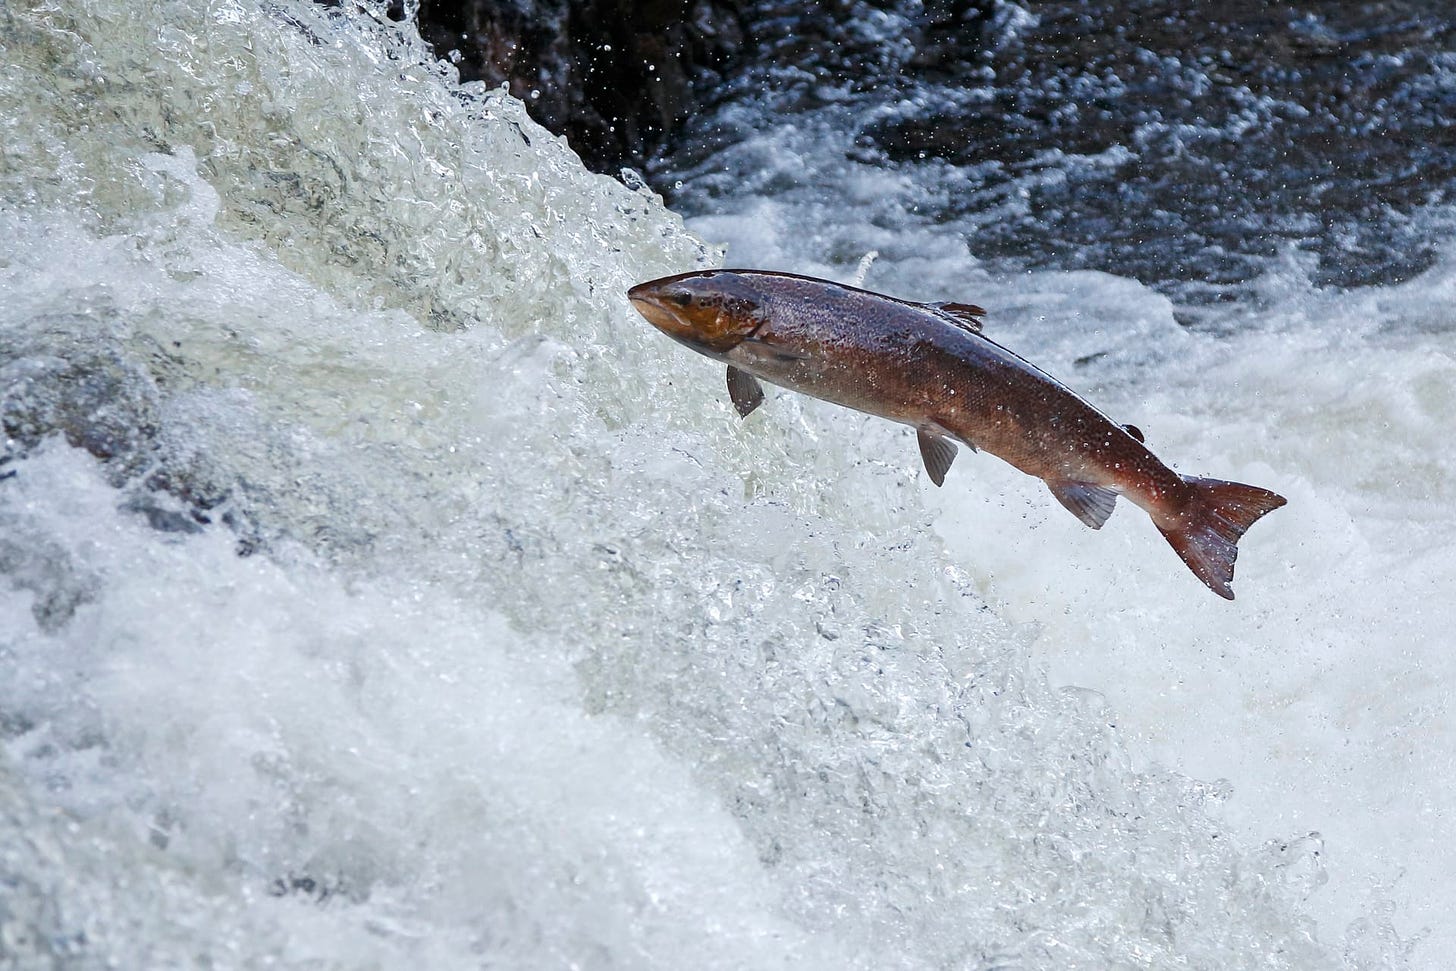 Find out where to watch leaping salmon in Scotland this autumn